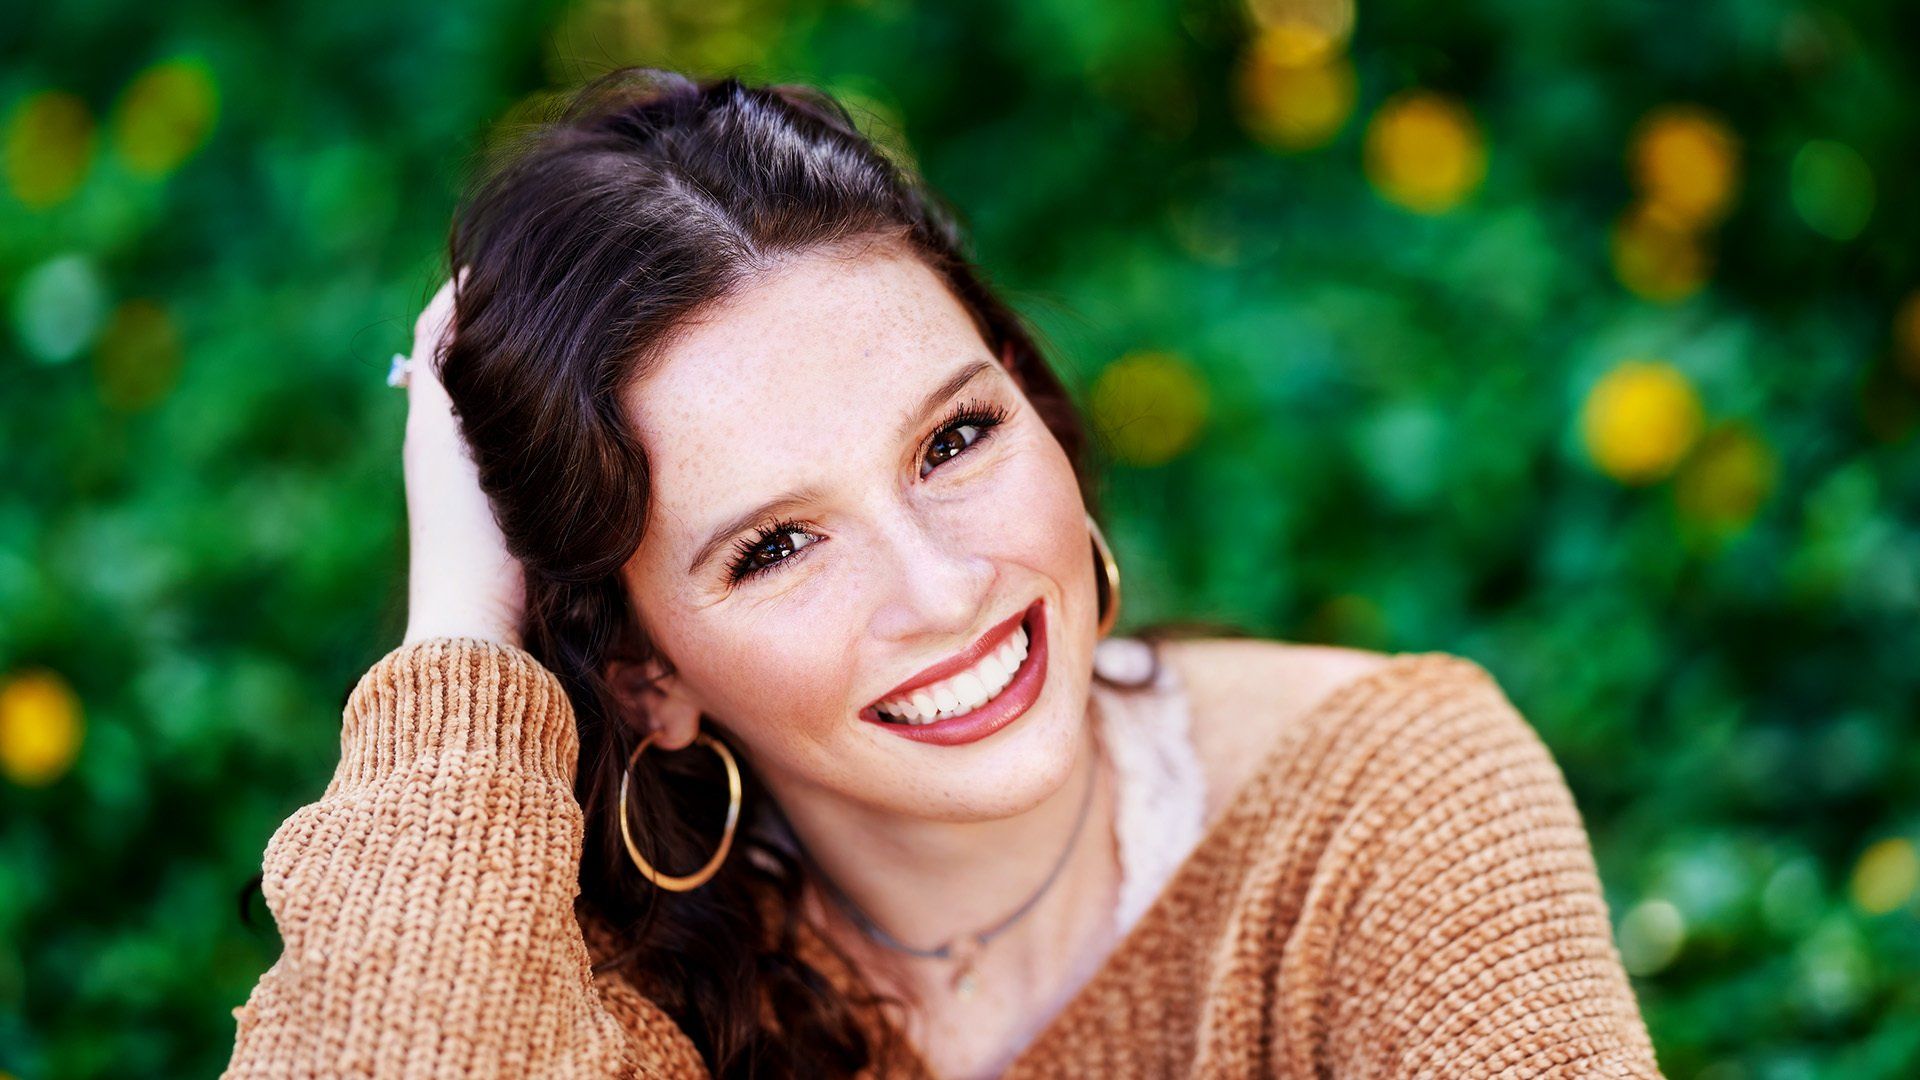 A young woman wearing a brown sweater and hoop earrings is smiling.